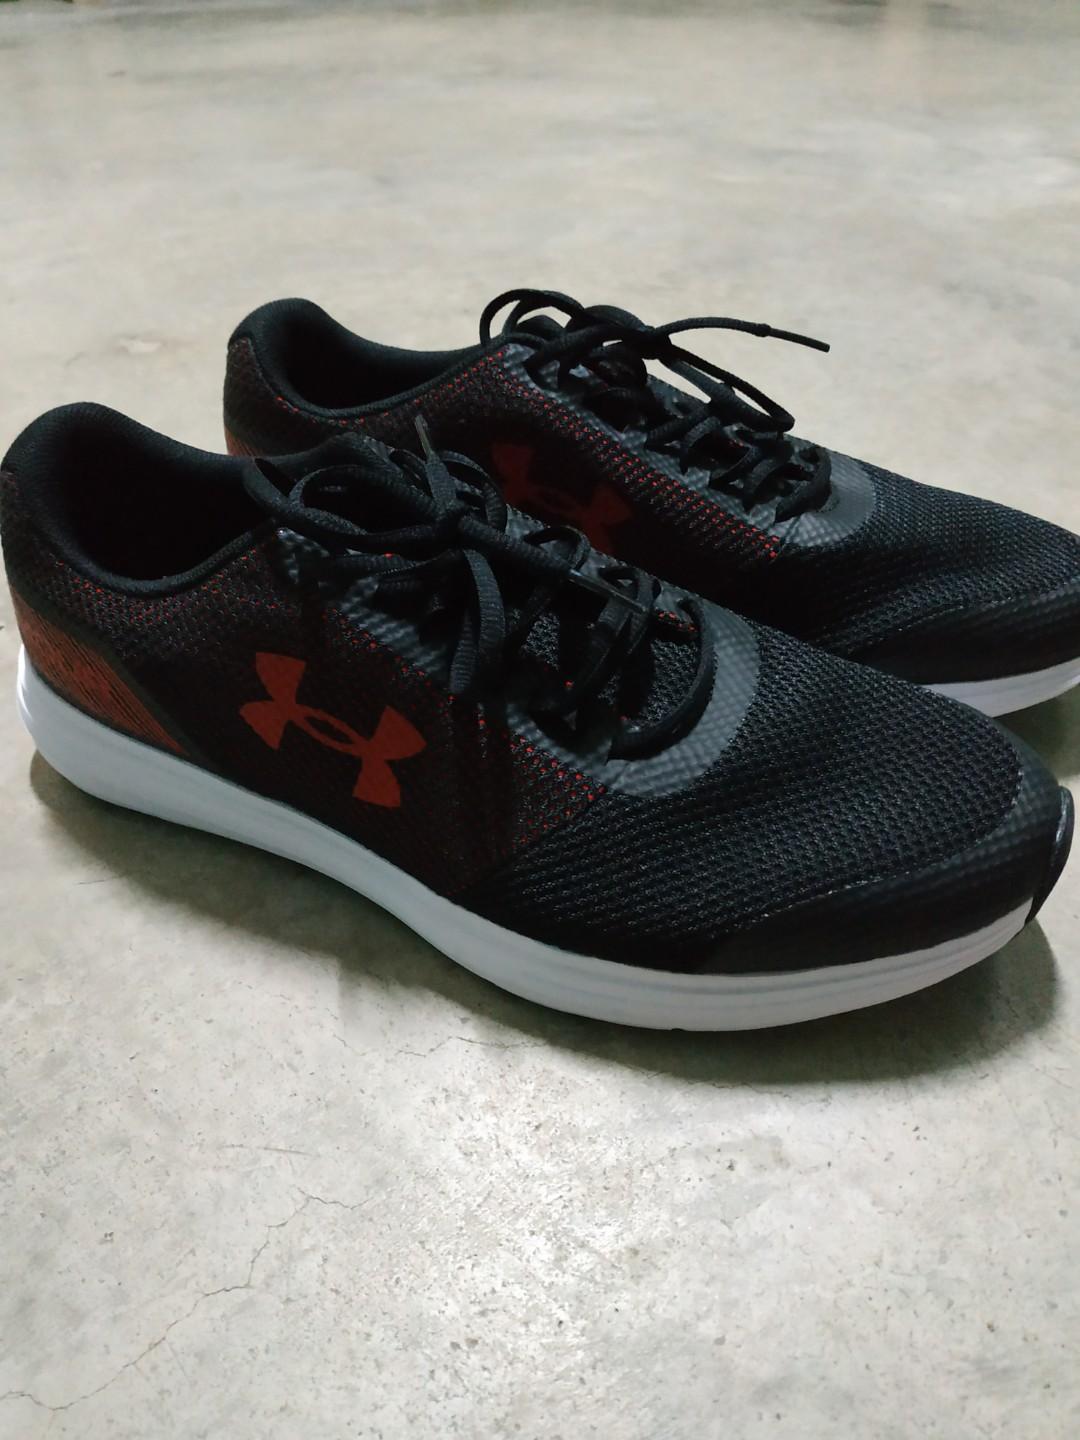 Under armour Surge running shoes, Men's 